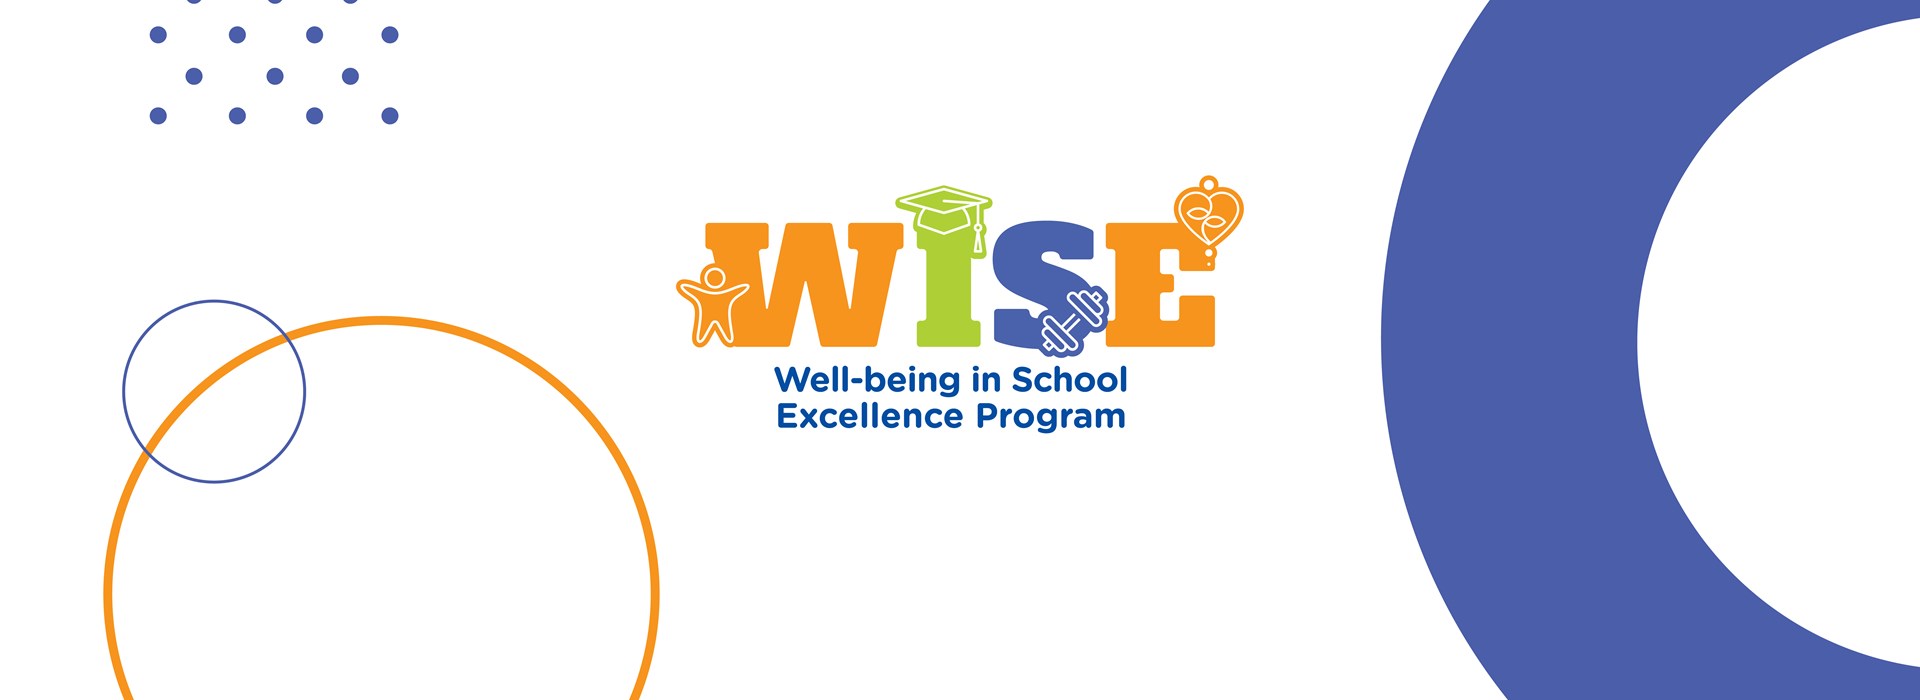 WELL-BEING IN SCHOOL EXCELLENCE 